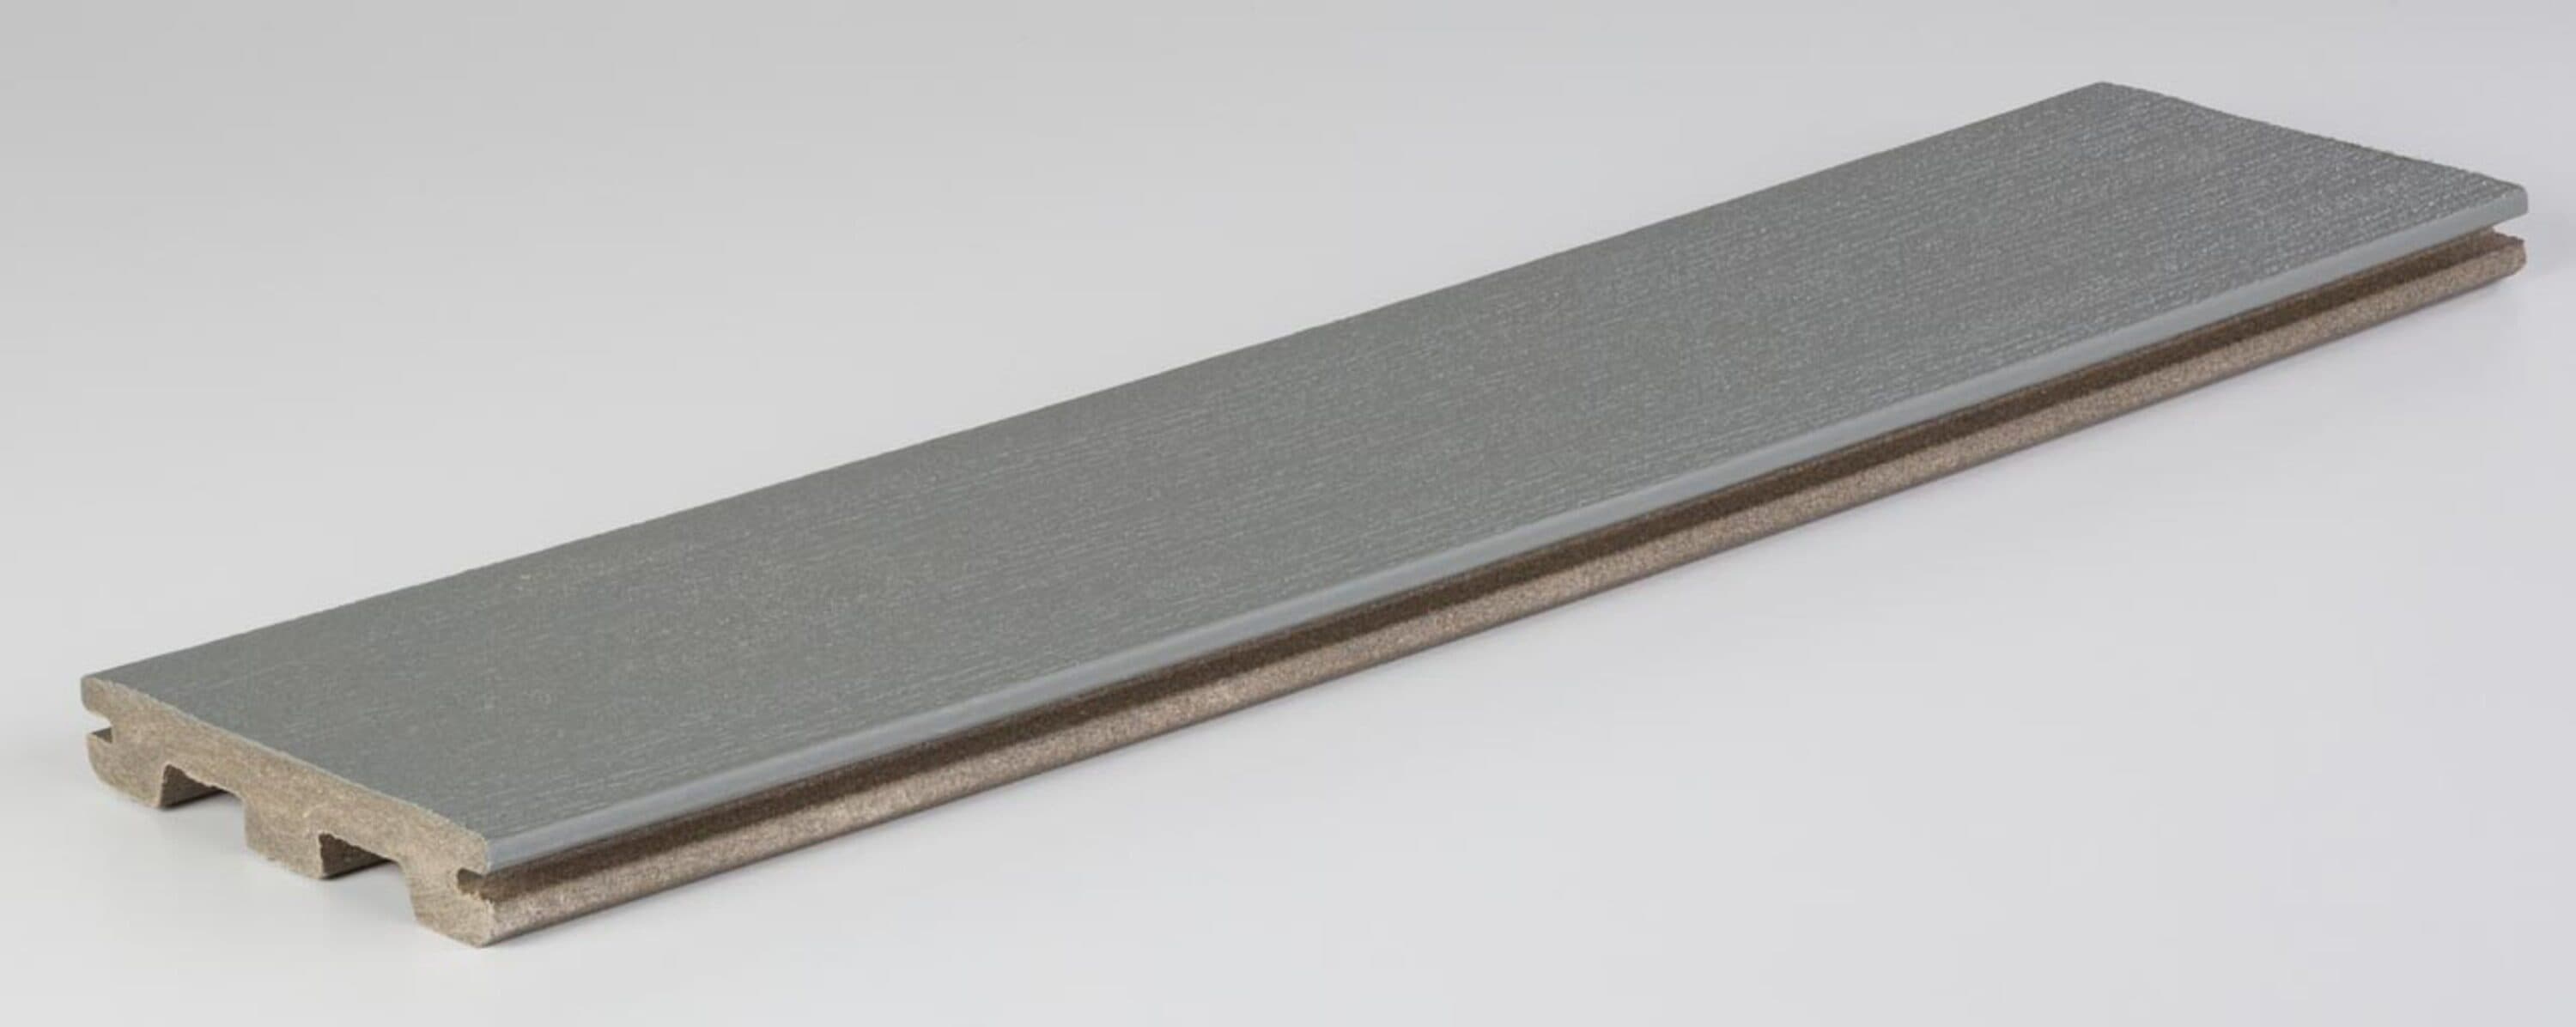 Prime 5/4-in x 6-in x 20-ft Maritime Gray Square Composite Deck Board | - TimberTech ES5420MG